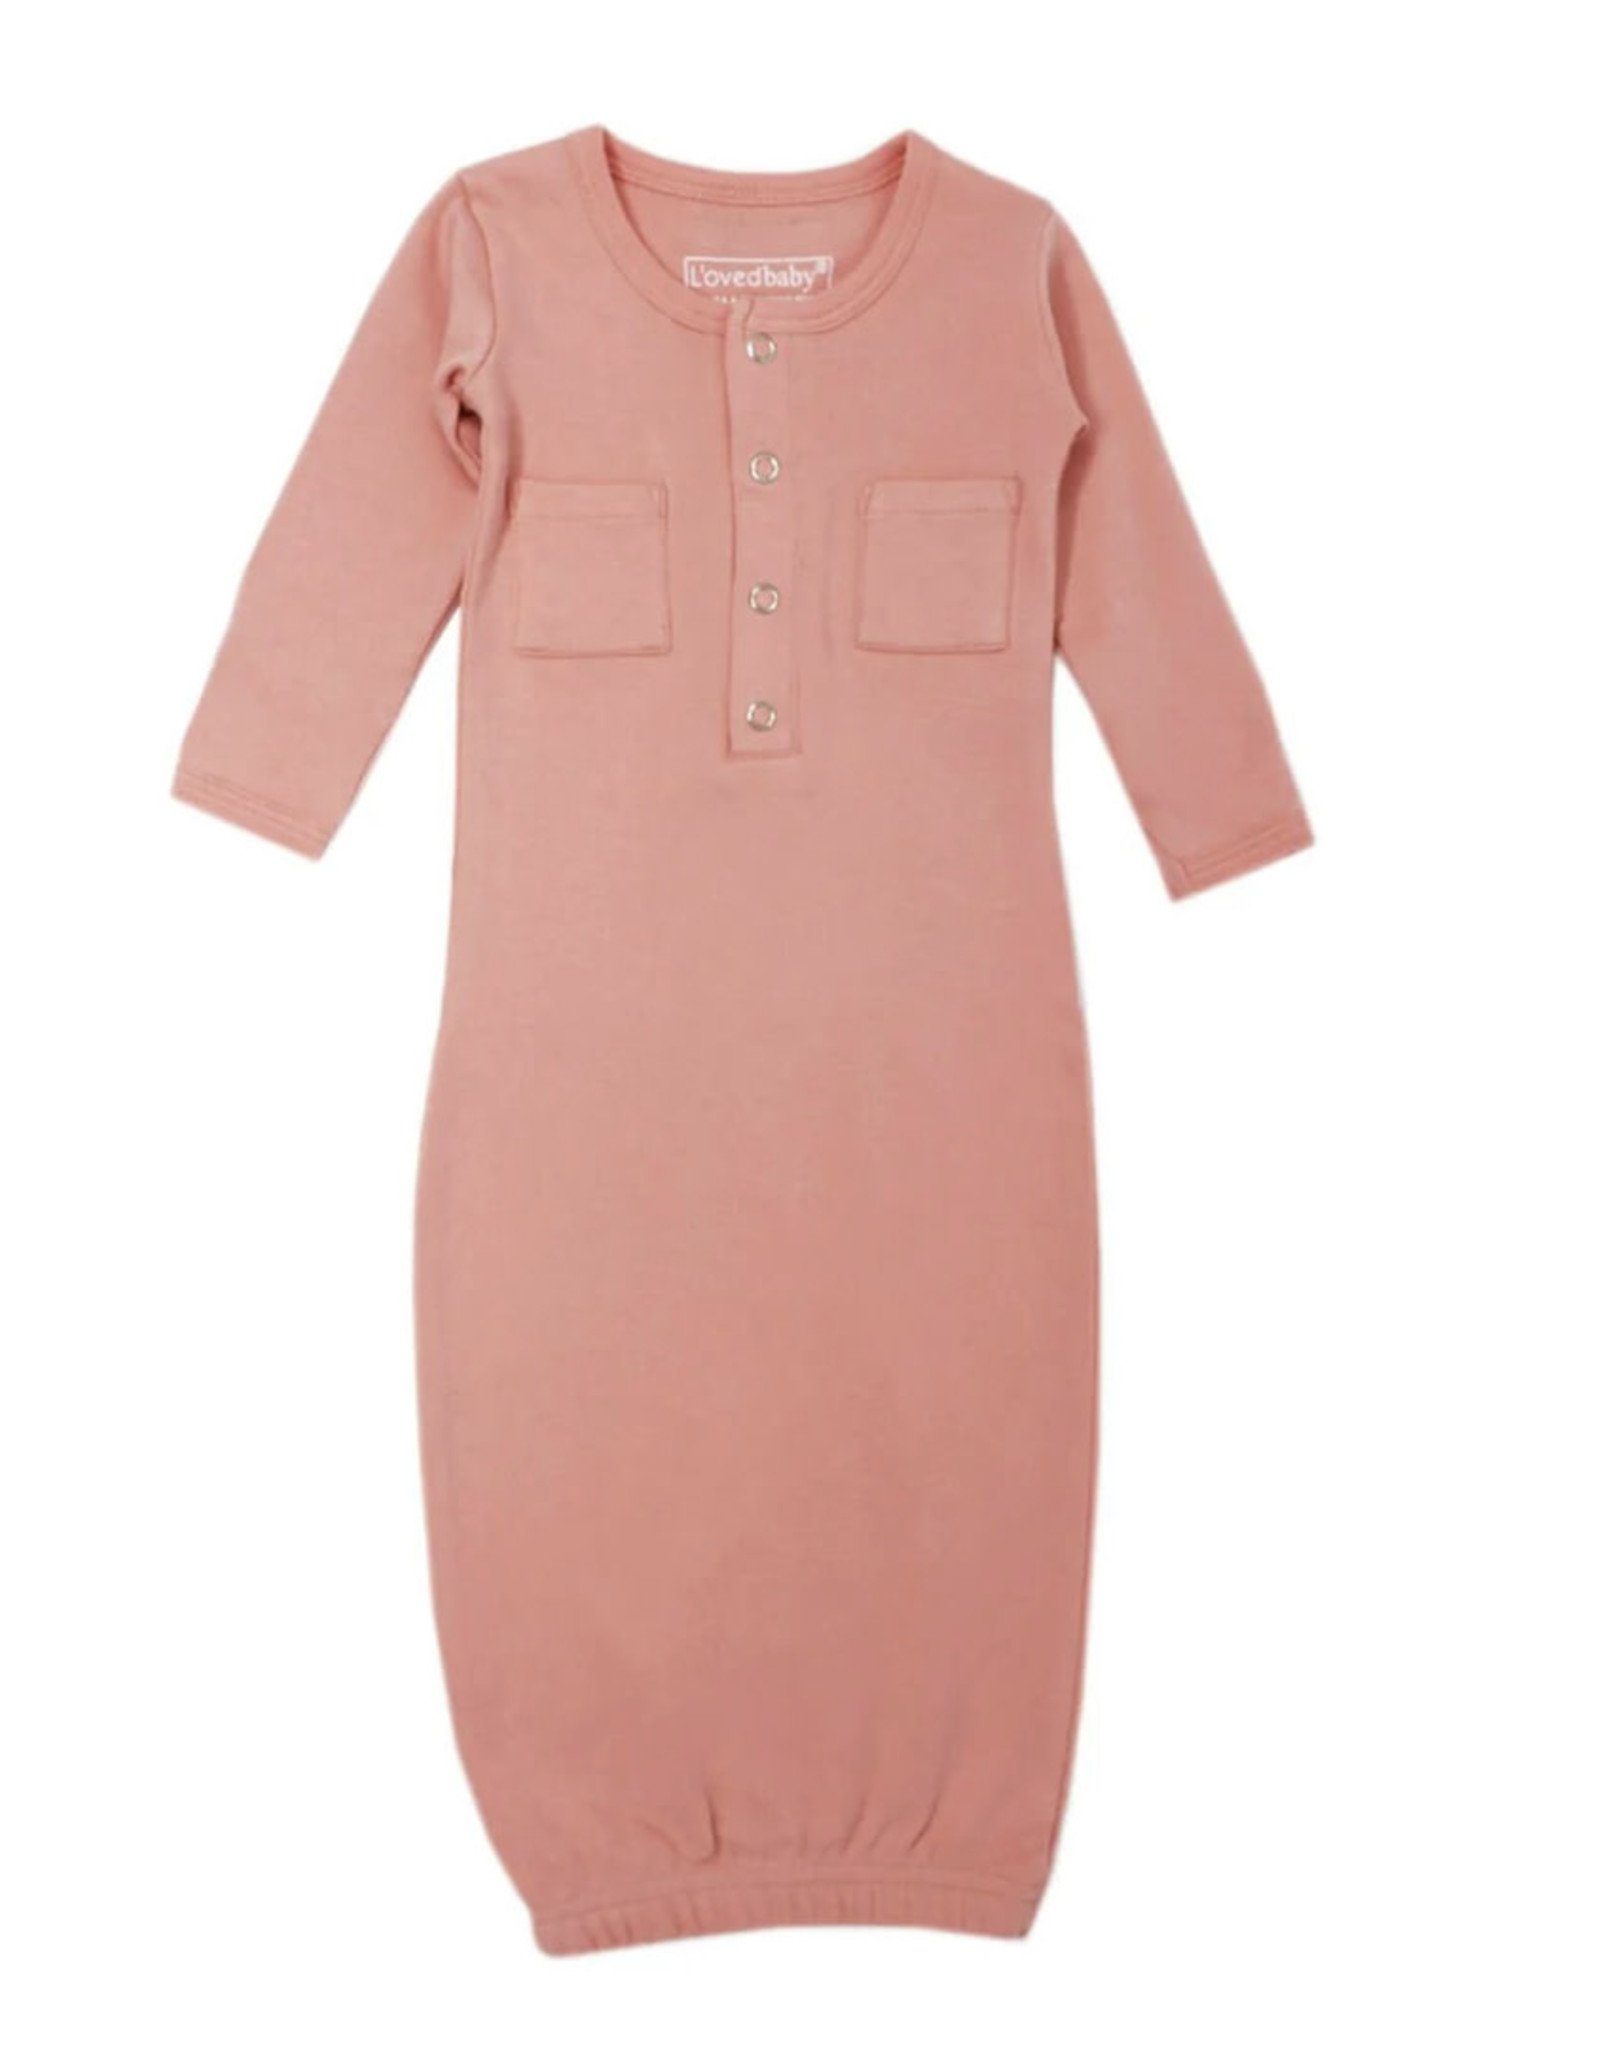 L'oved Baby Organic Cotton Baby Gown- Coral